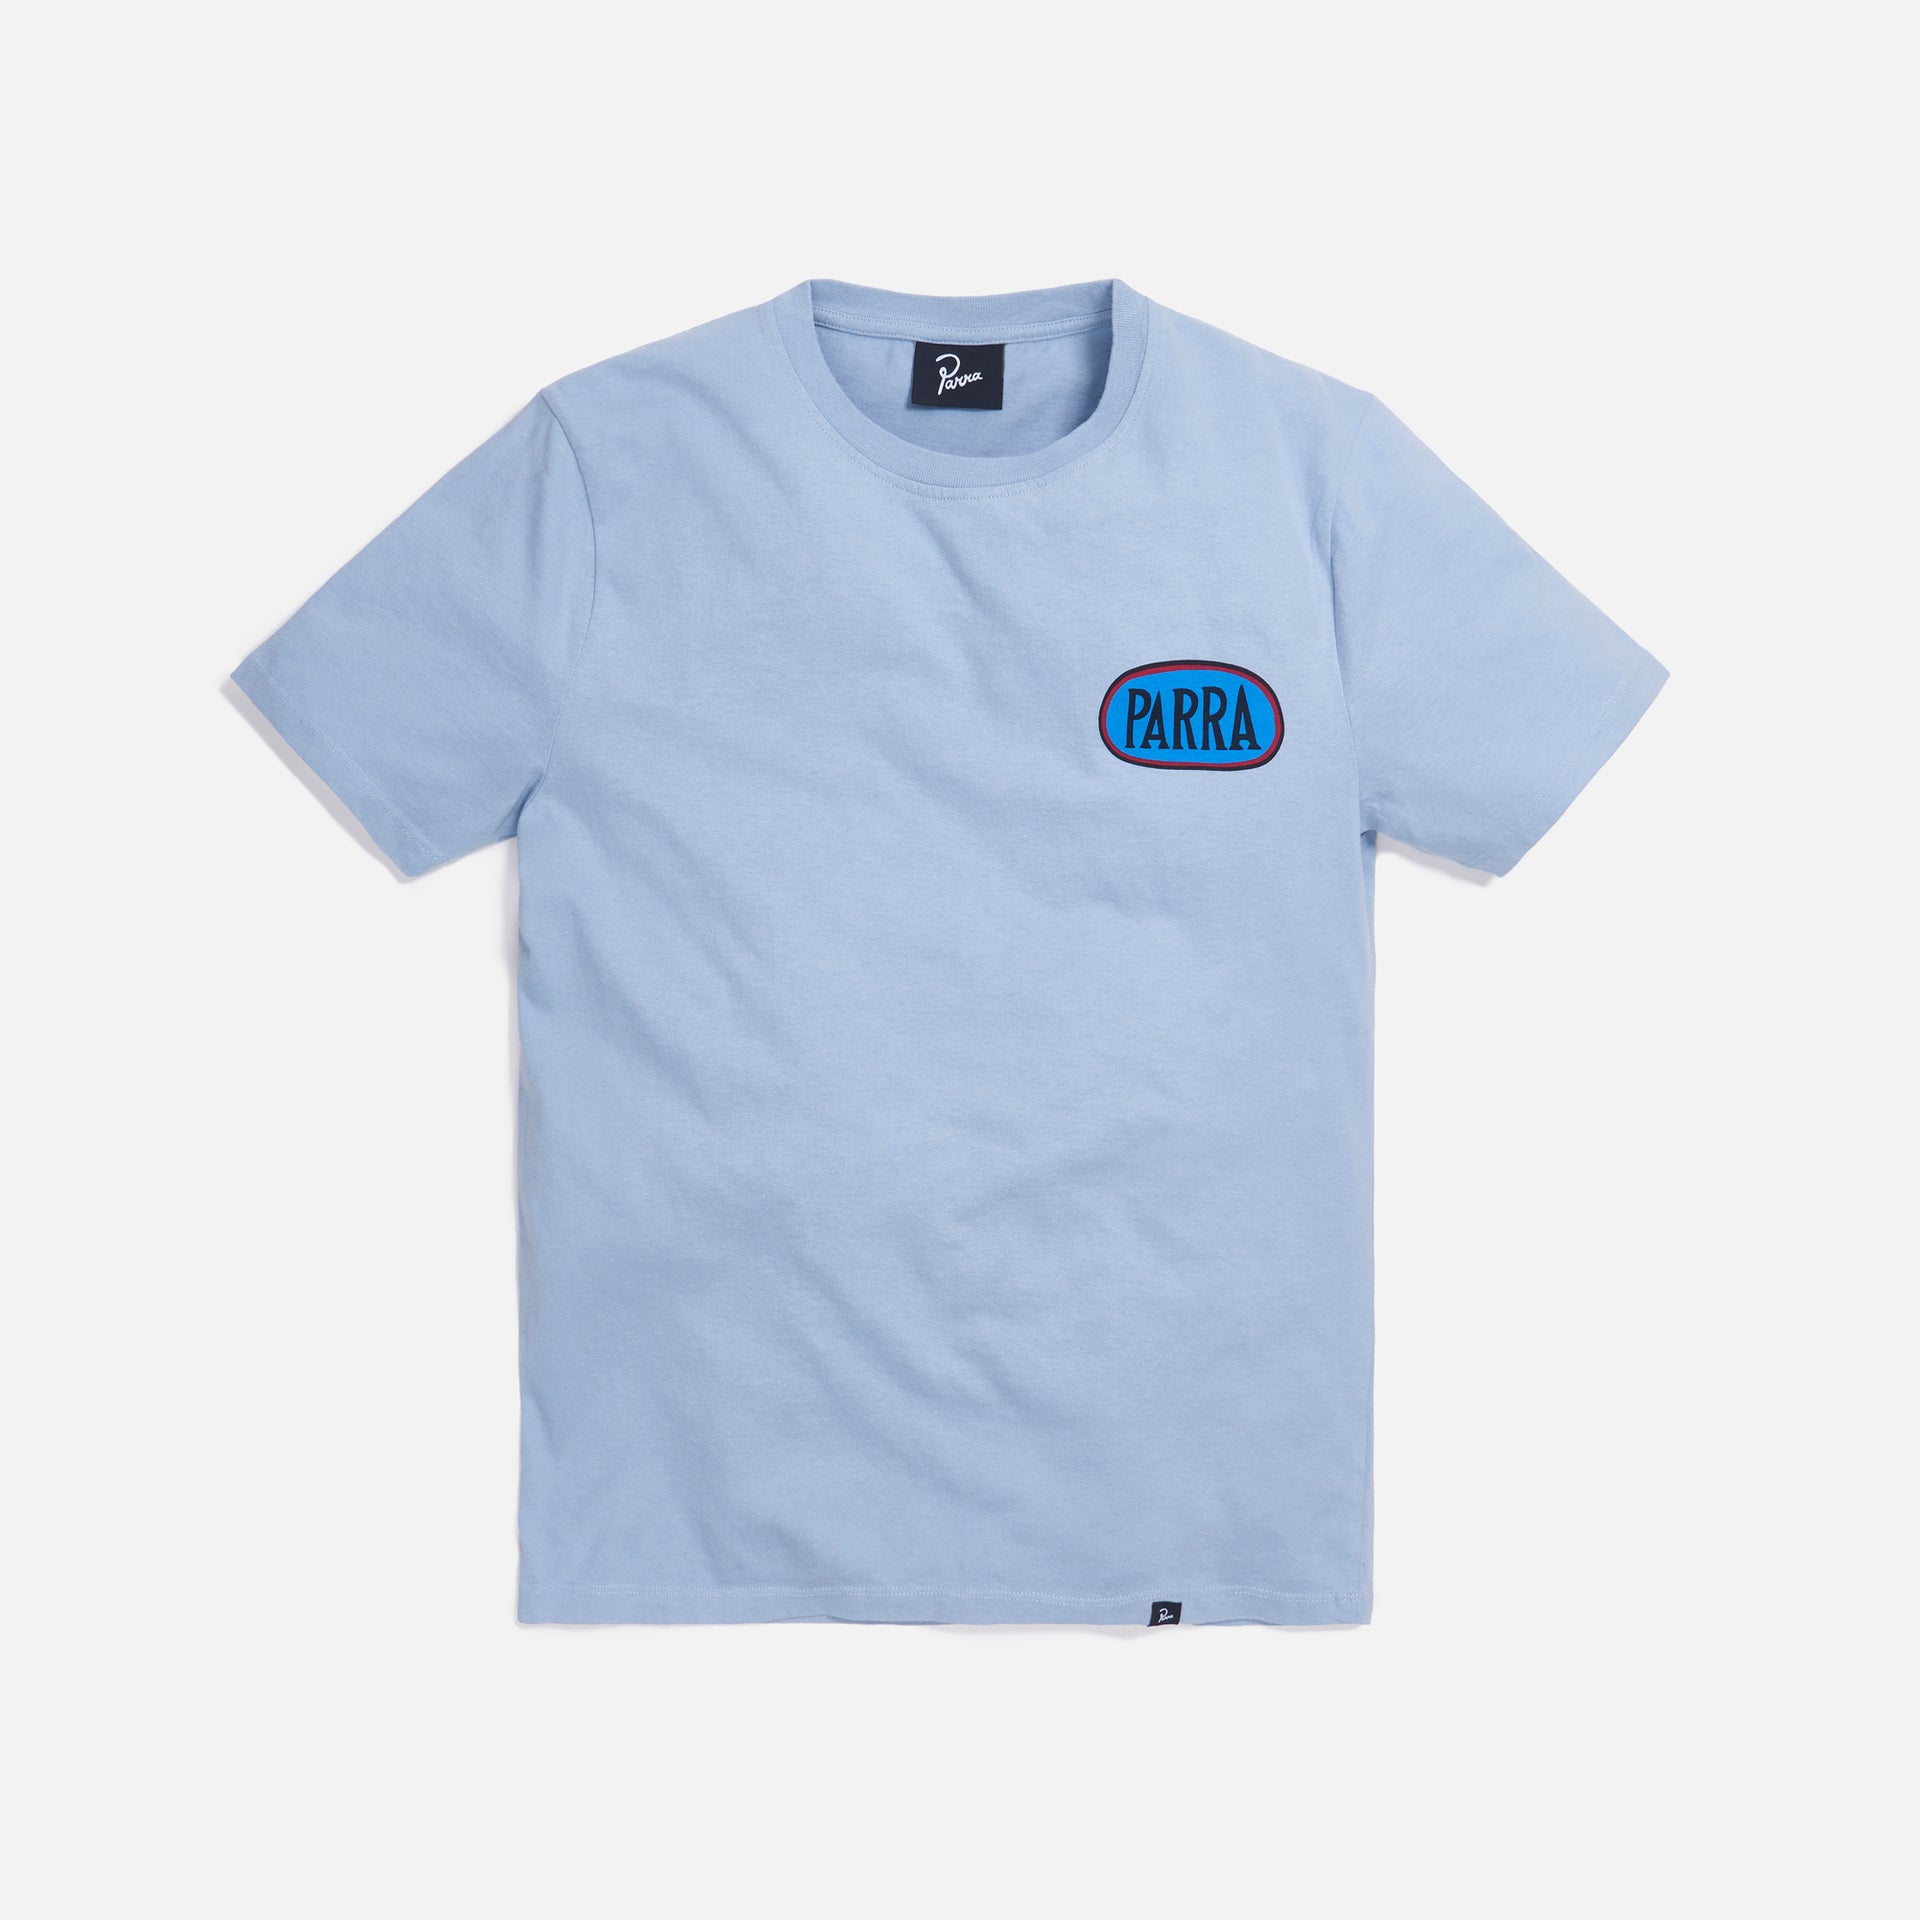 by Parra Spilled Drink Tee - Dusty Blue